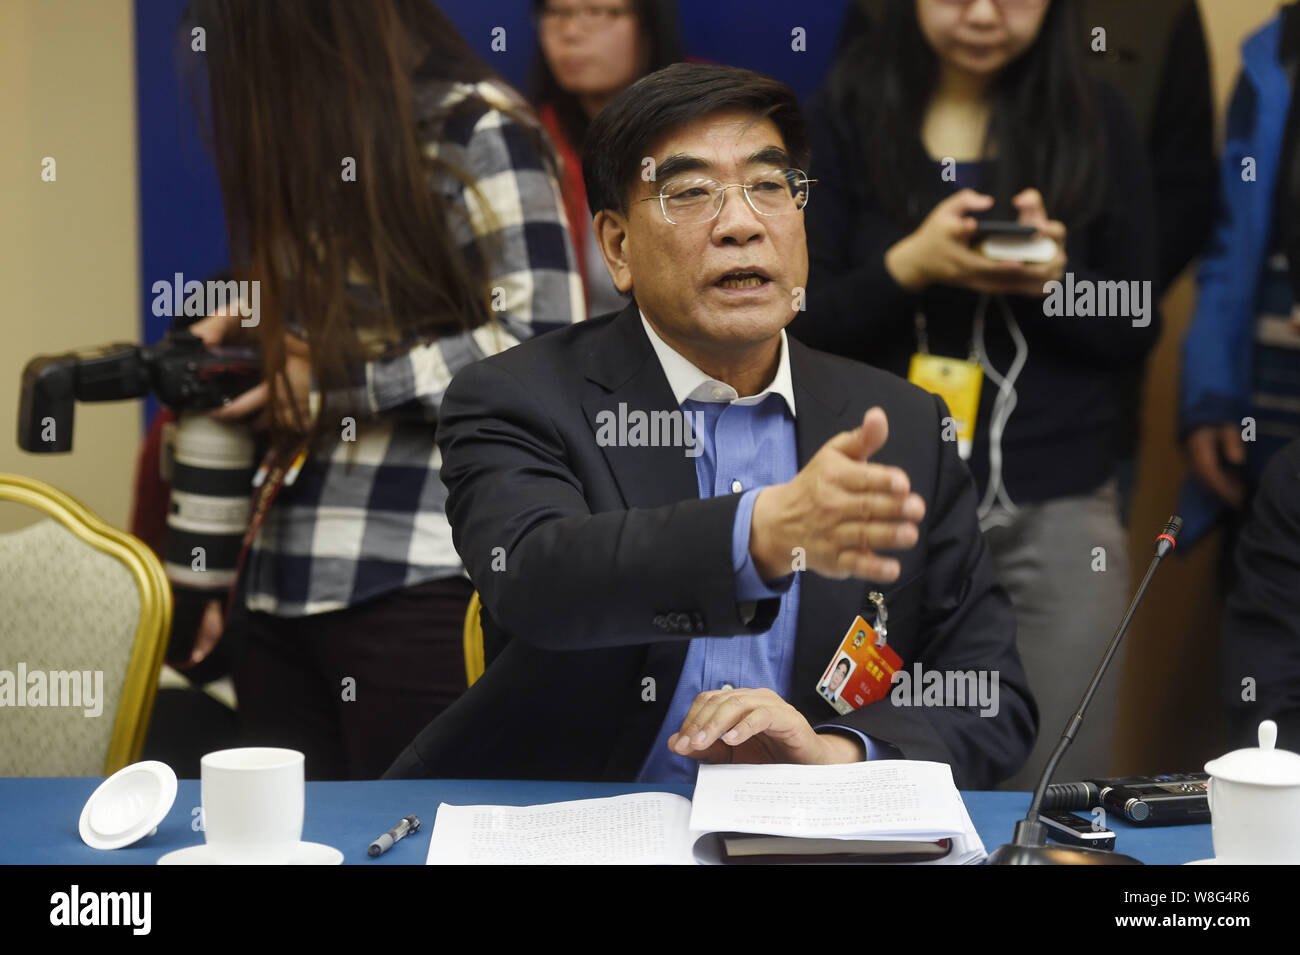 Fu Chengyu, Chairman of China Petroleum and Chemical Corp (Sinopec), speaks at a panel discussion during the third Session of the 12th National Commit Stock Photo